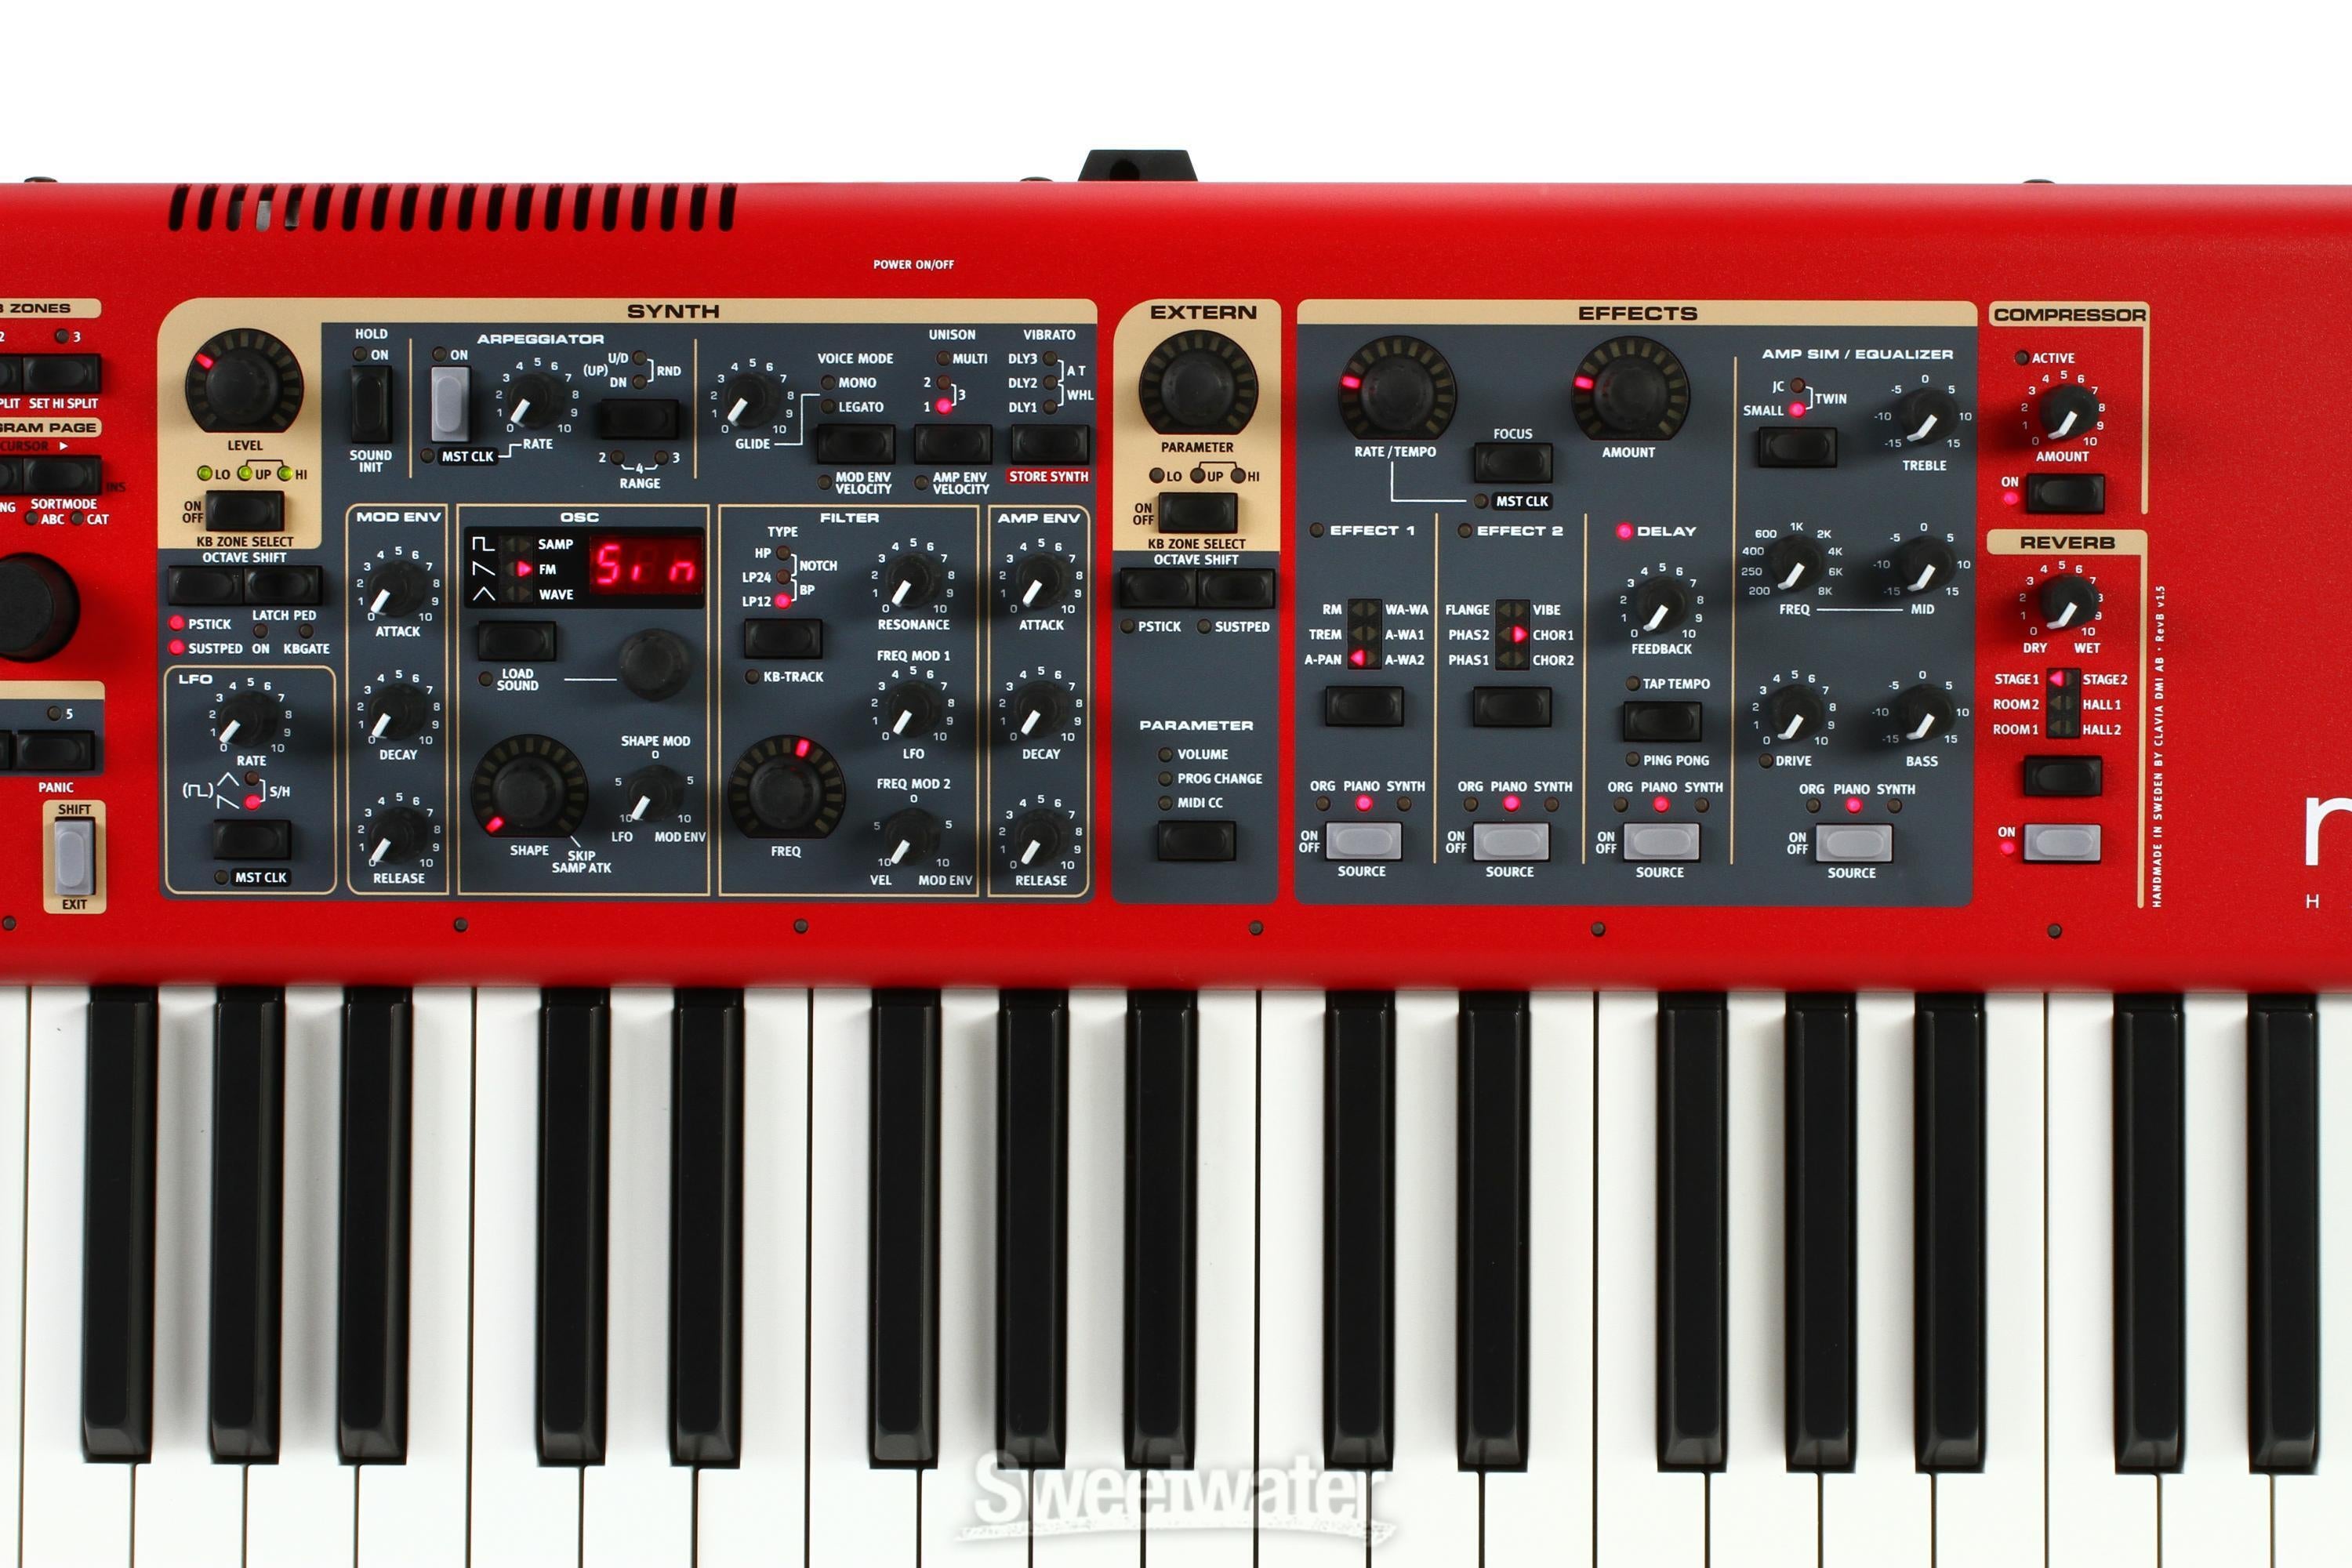 NORD STAGE 2 EX 88 ステージ2 ノード - 鍵盤楽器